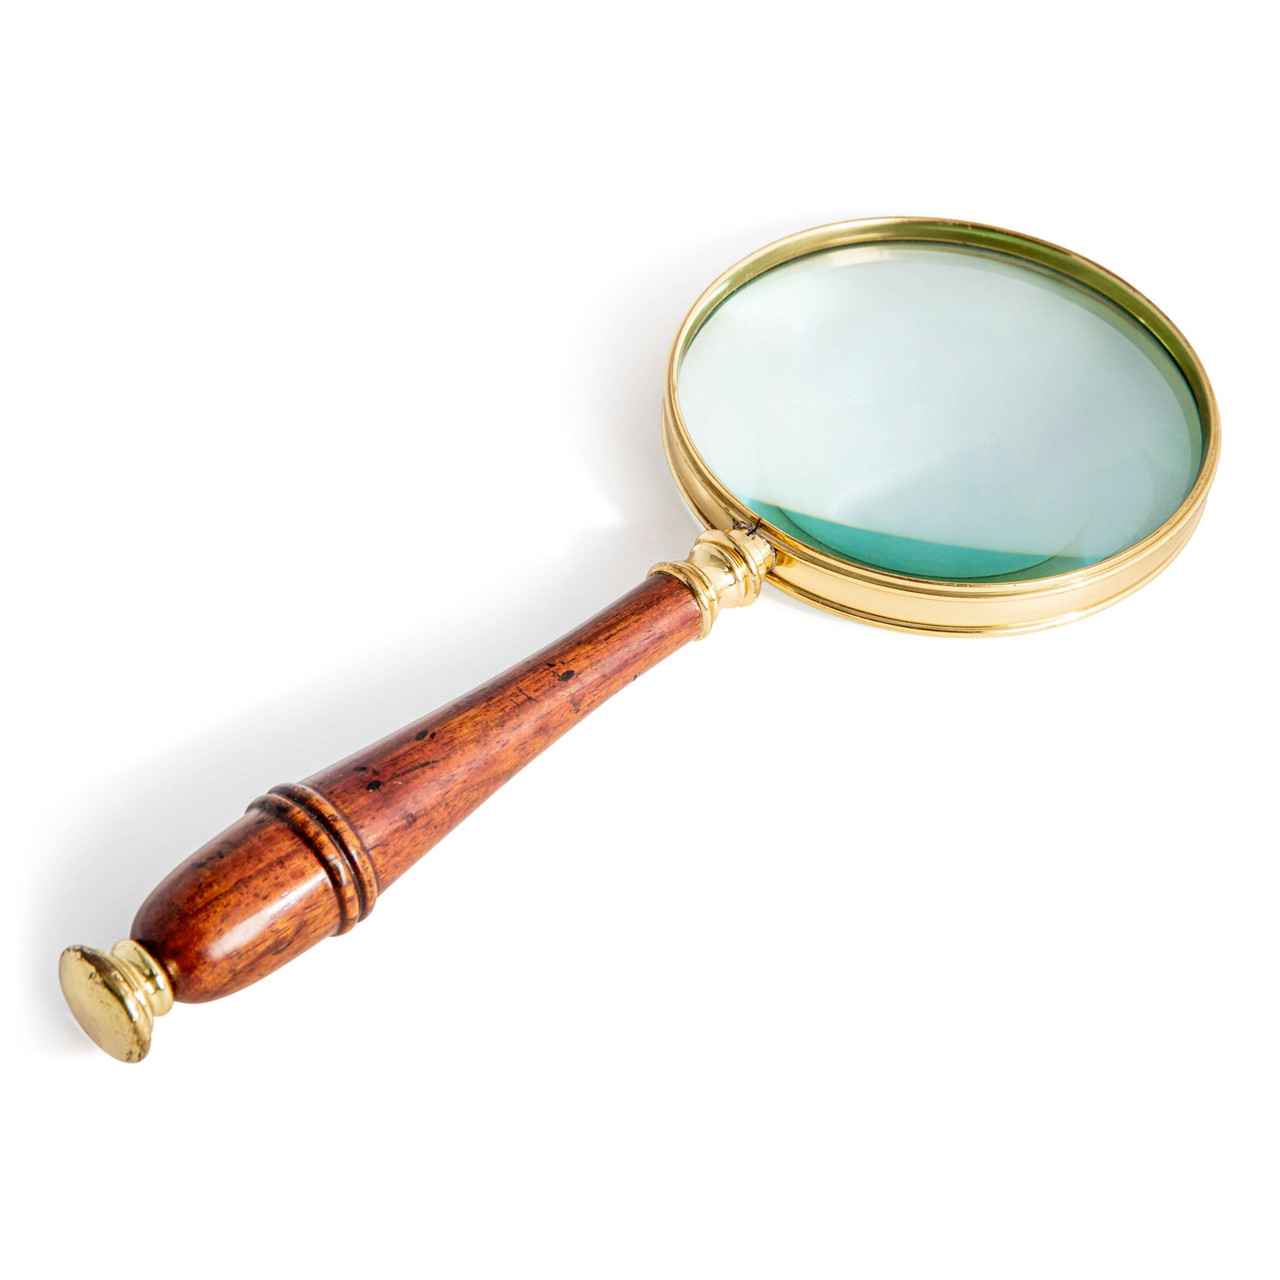 Magnifier Magnifying Glass Brass Honey 3x Reading Device